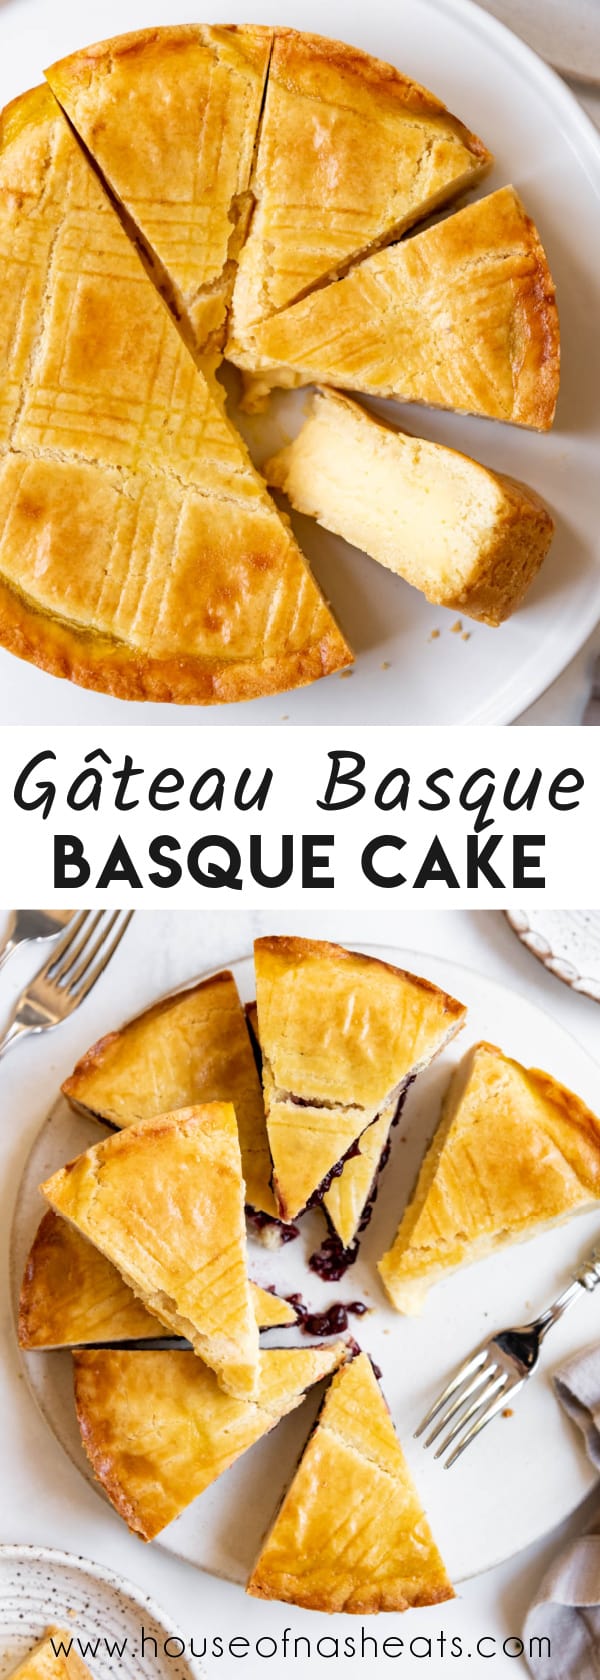 A collage of images of Gateau Basque with text overlay.